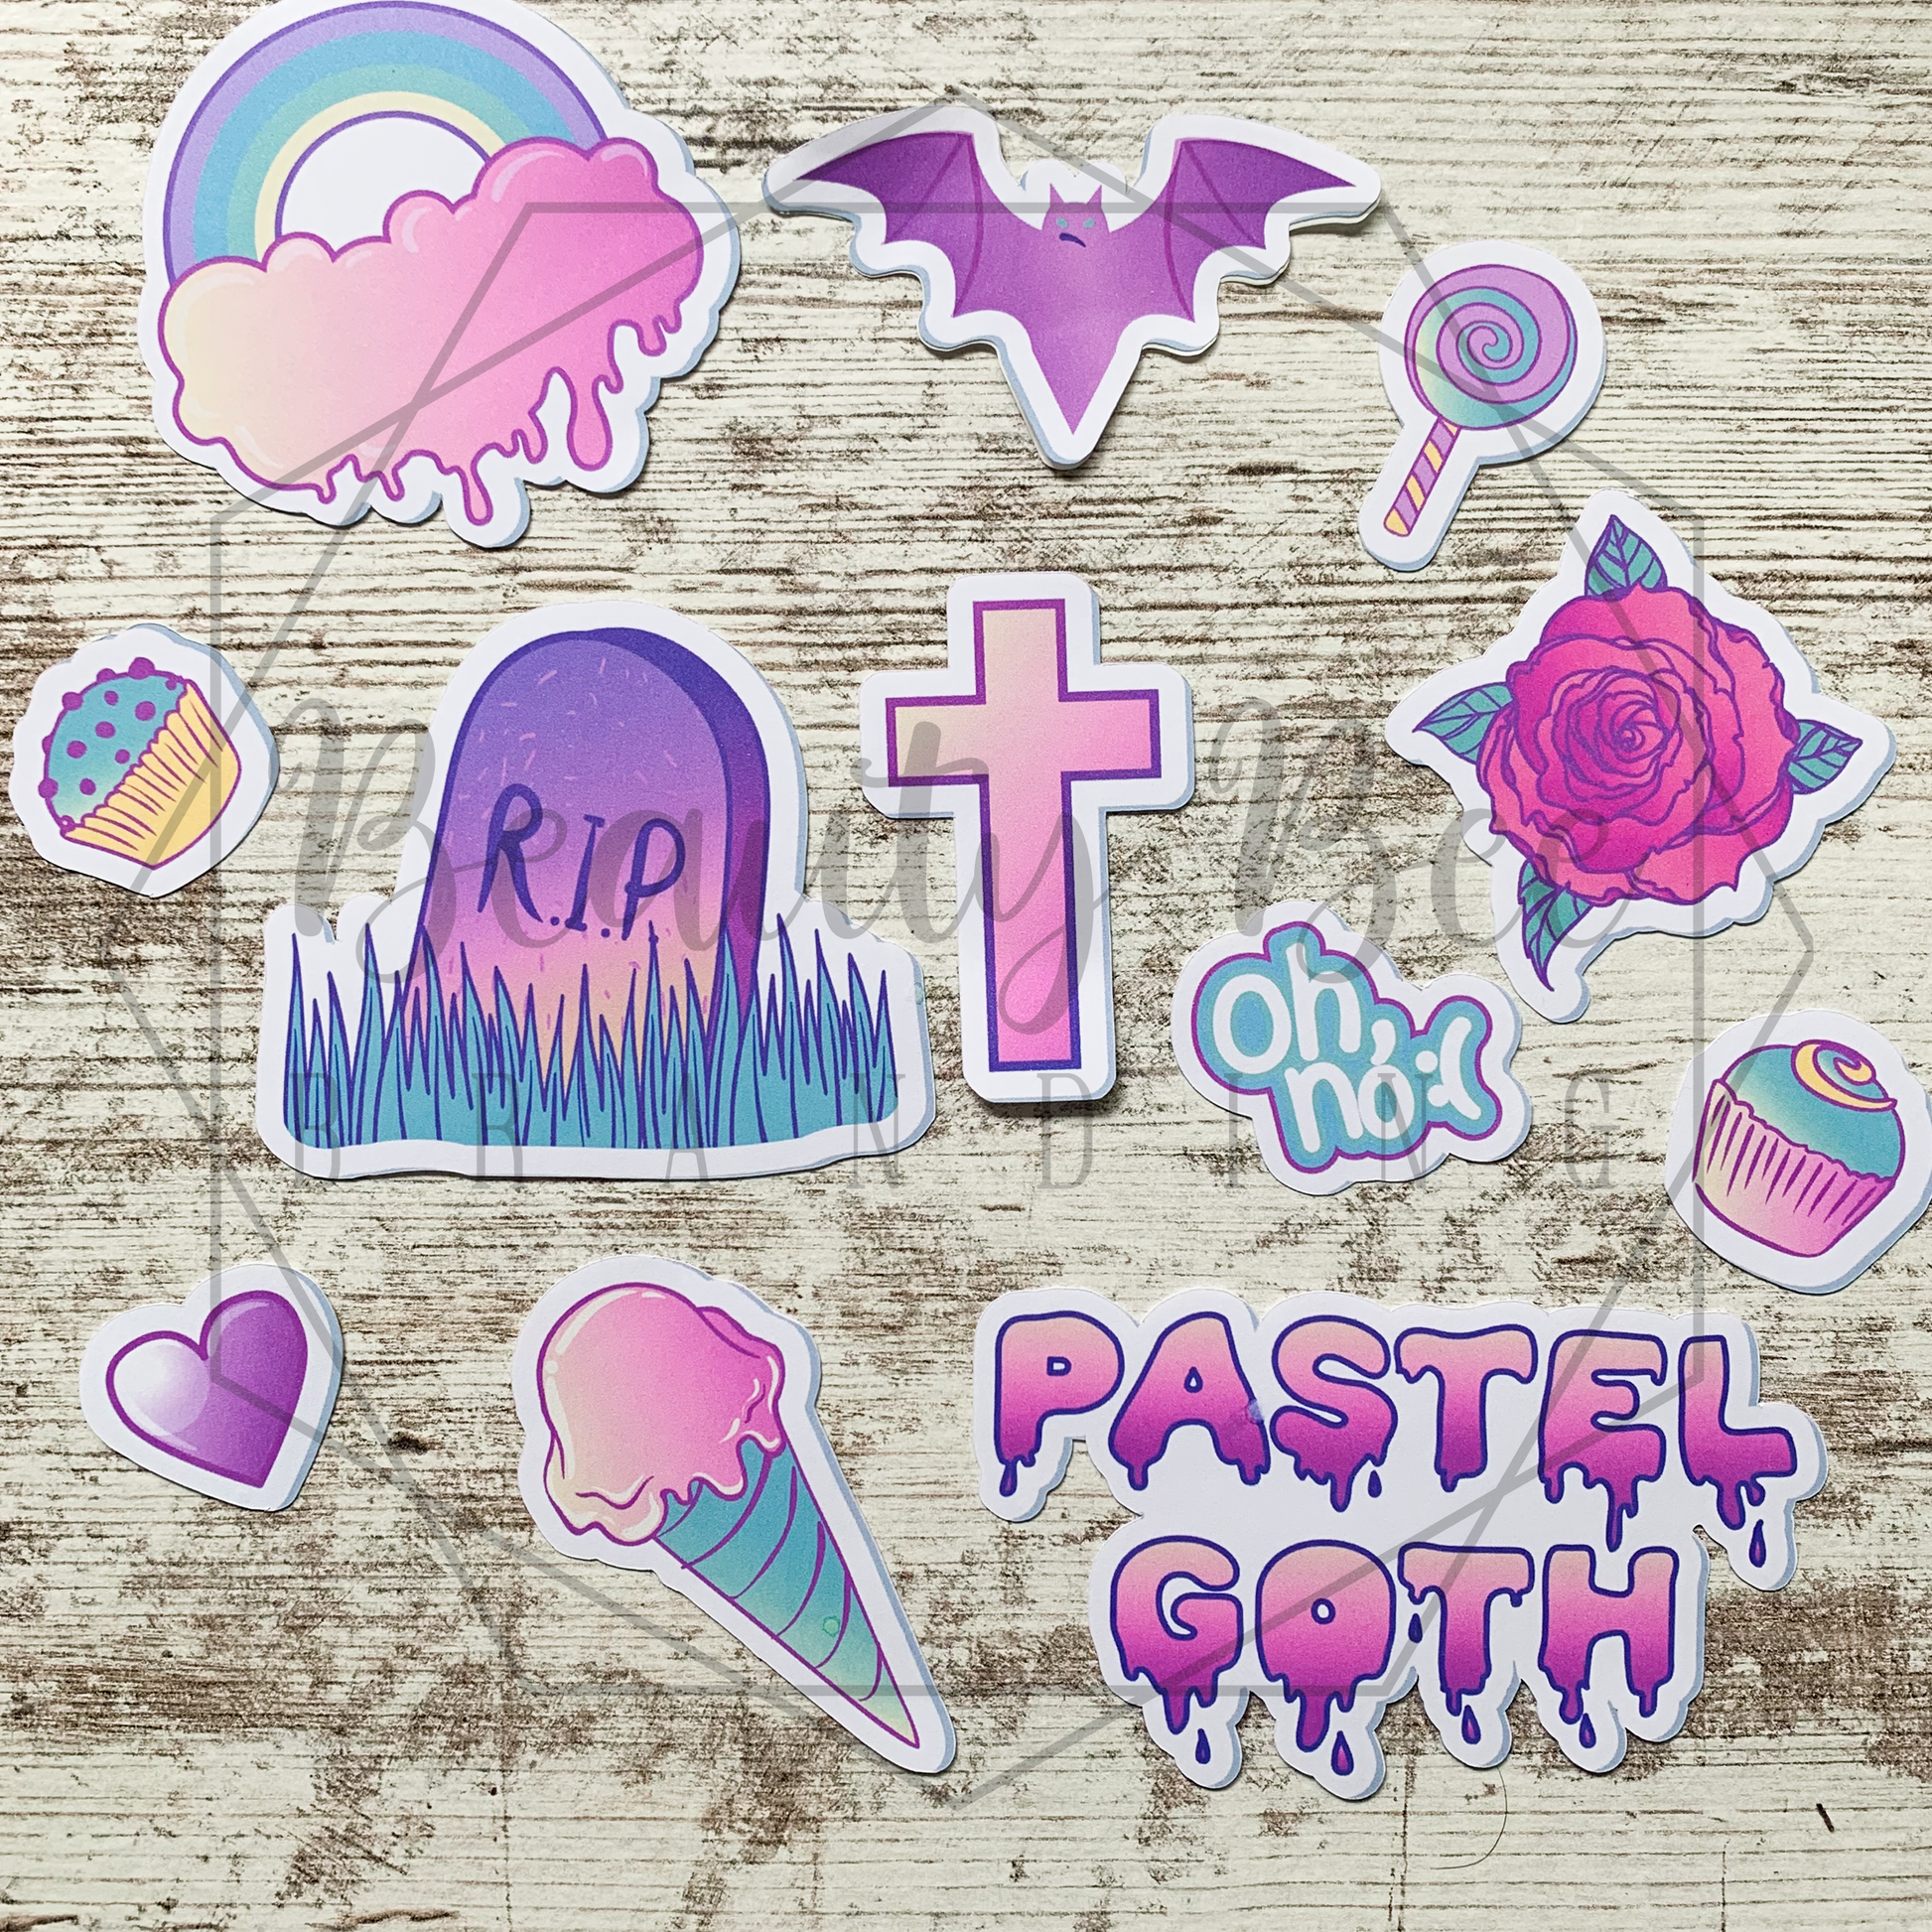 Oh My Goth Stickers, Magnet